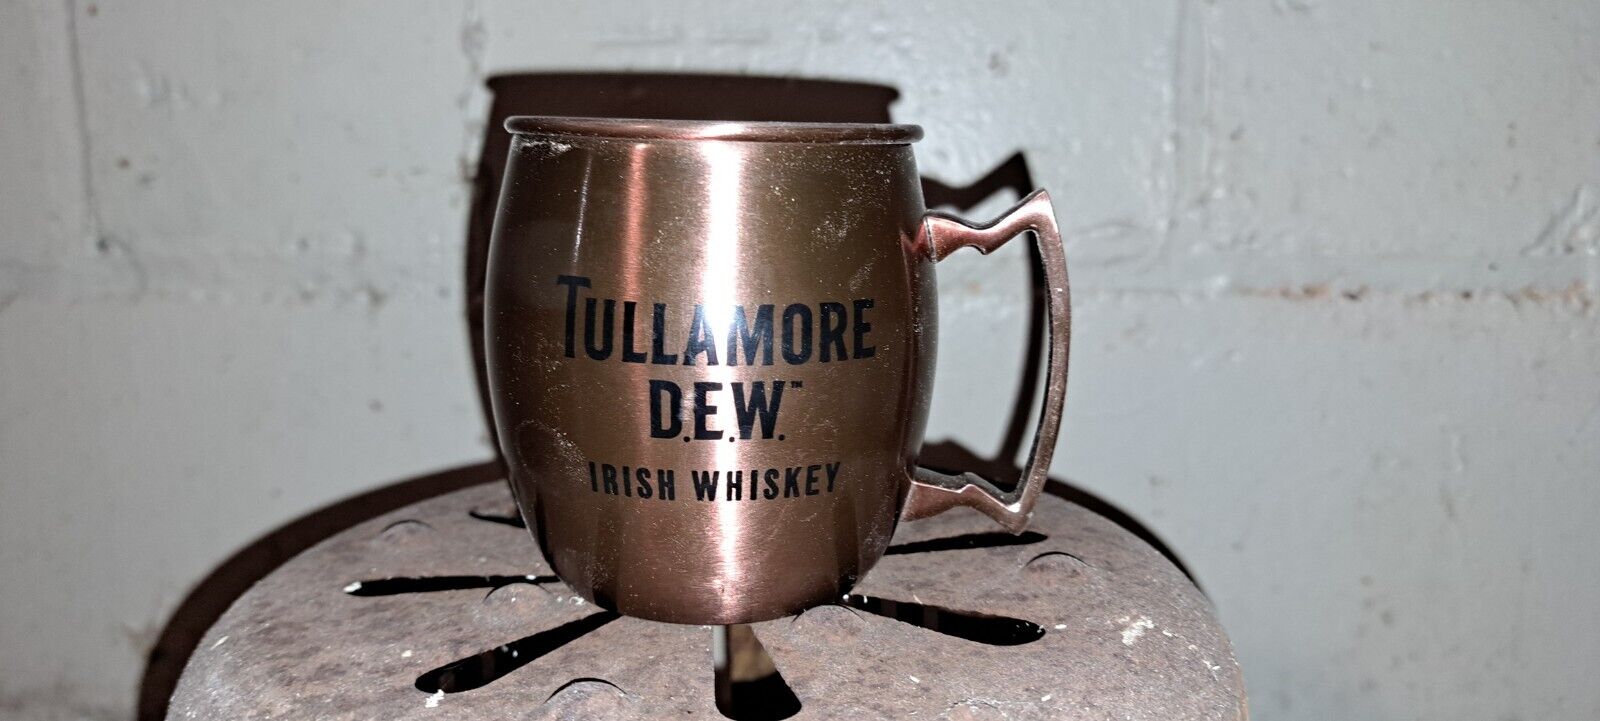 Moscow Mule Copper Mug Tullamore Dew Irish Whiskey Copper Over Tin Cup Cocktail